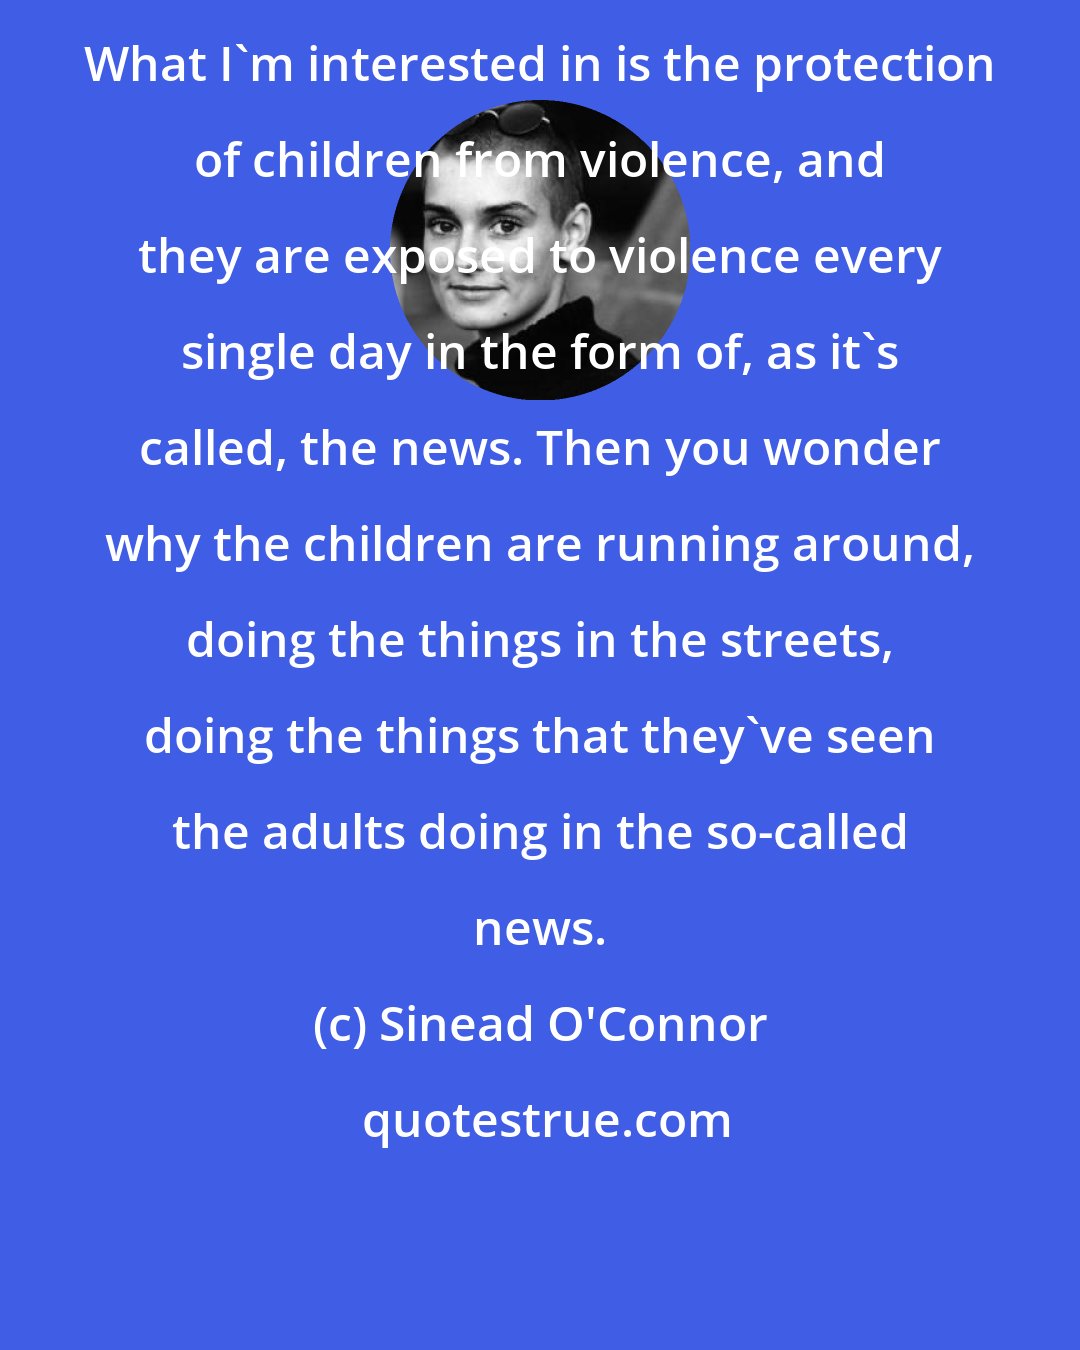 Sinead O'Connor: What I'm interested in is the protection of children from violence, and they are exposed to violence every single day in the form of, as it's called, the news. Then you wonder why the children are running around, doing the things in the streets, doing the things that they've seen the adults doing in the so-called news.